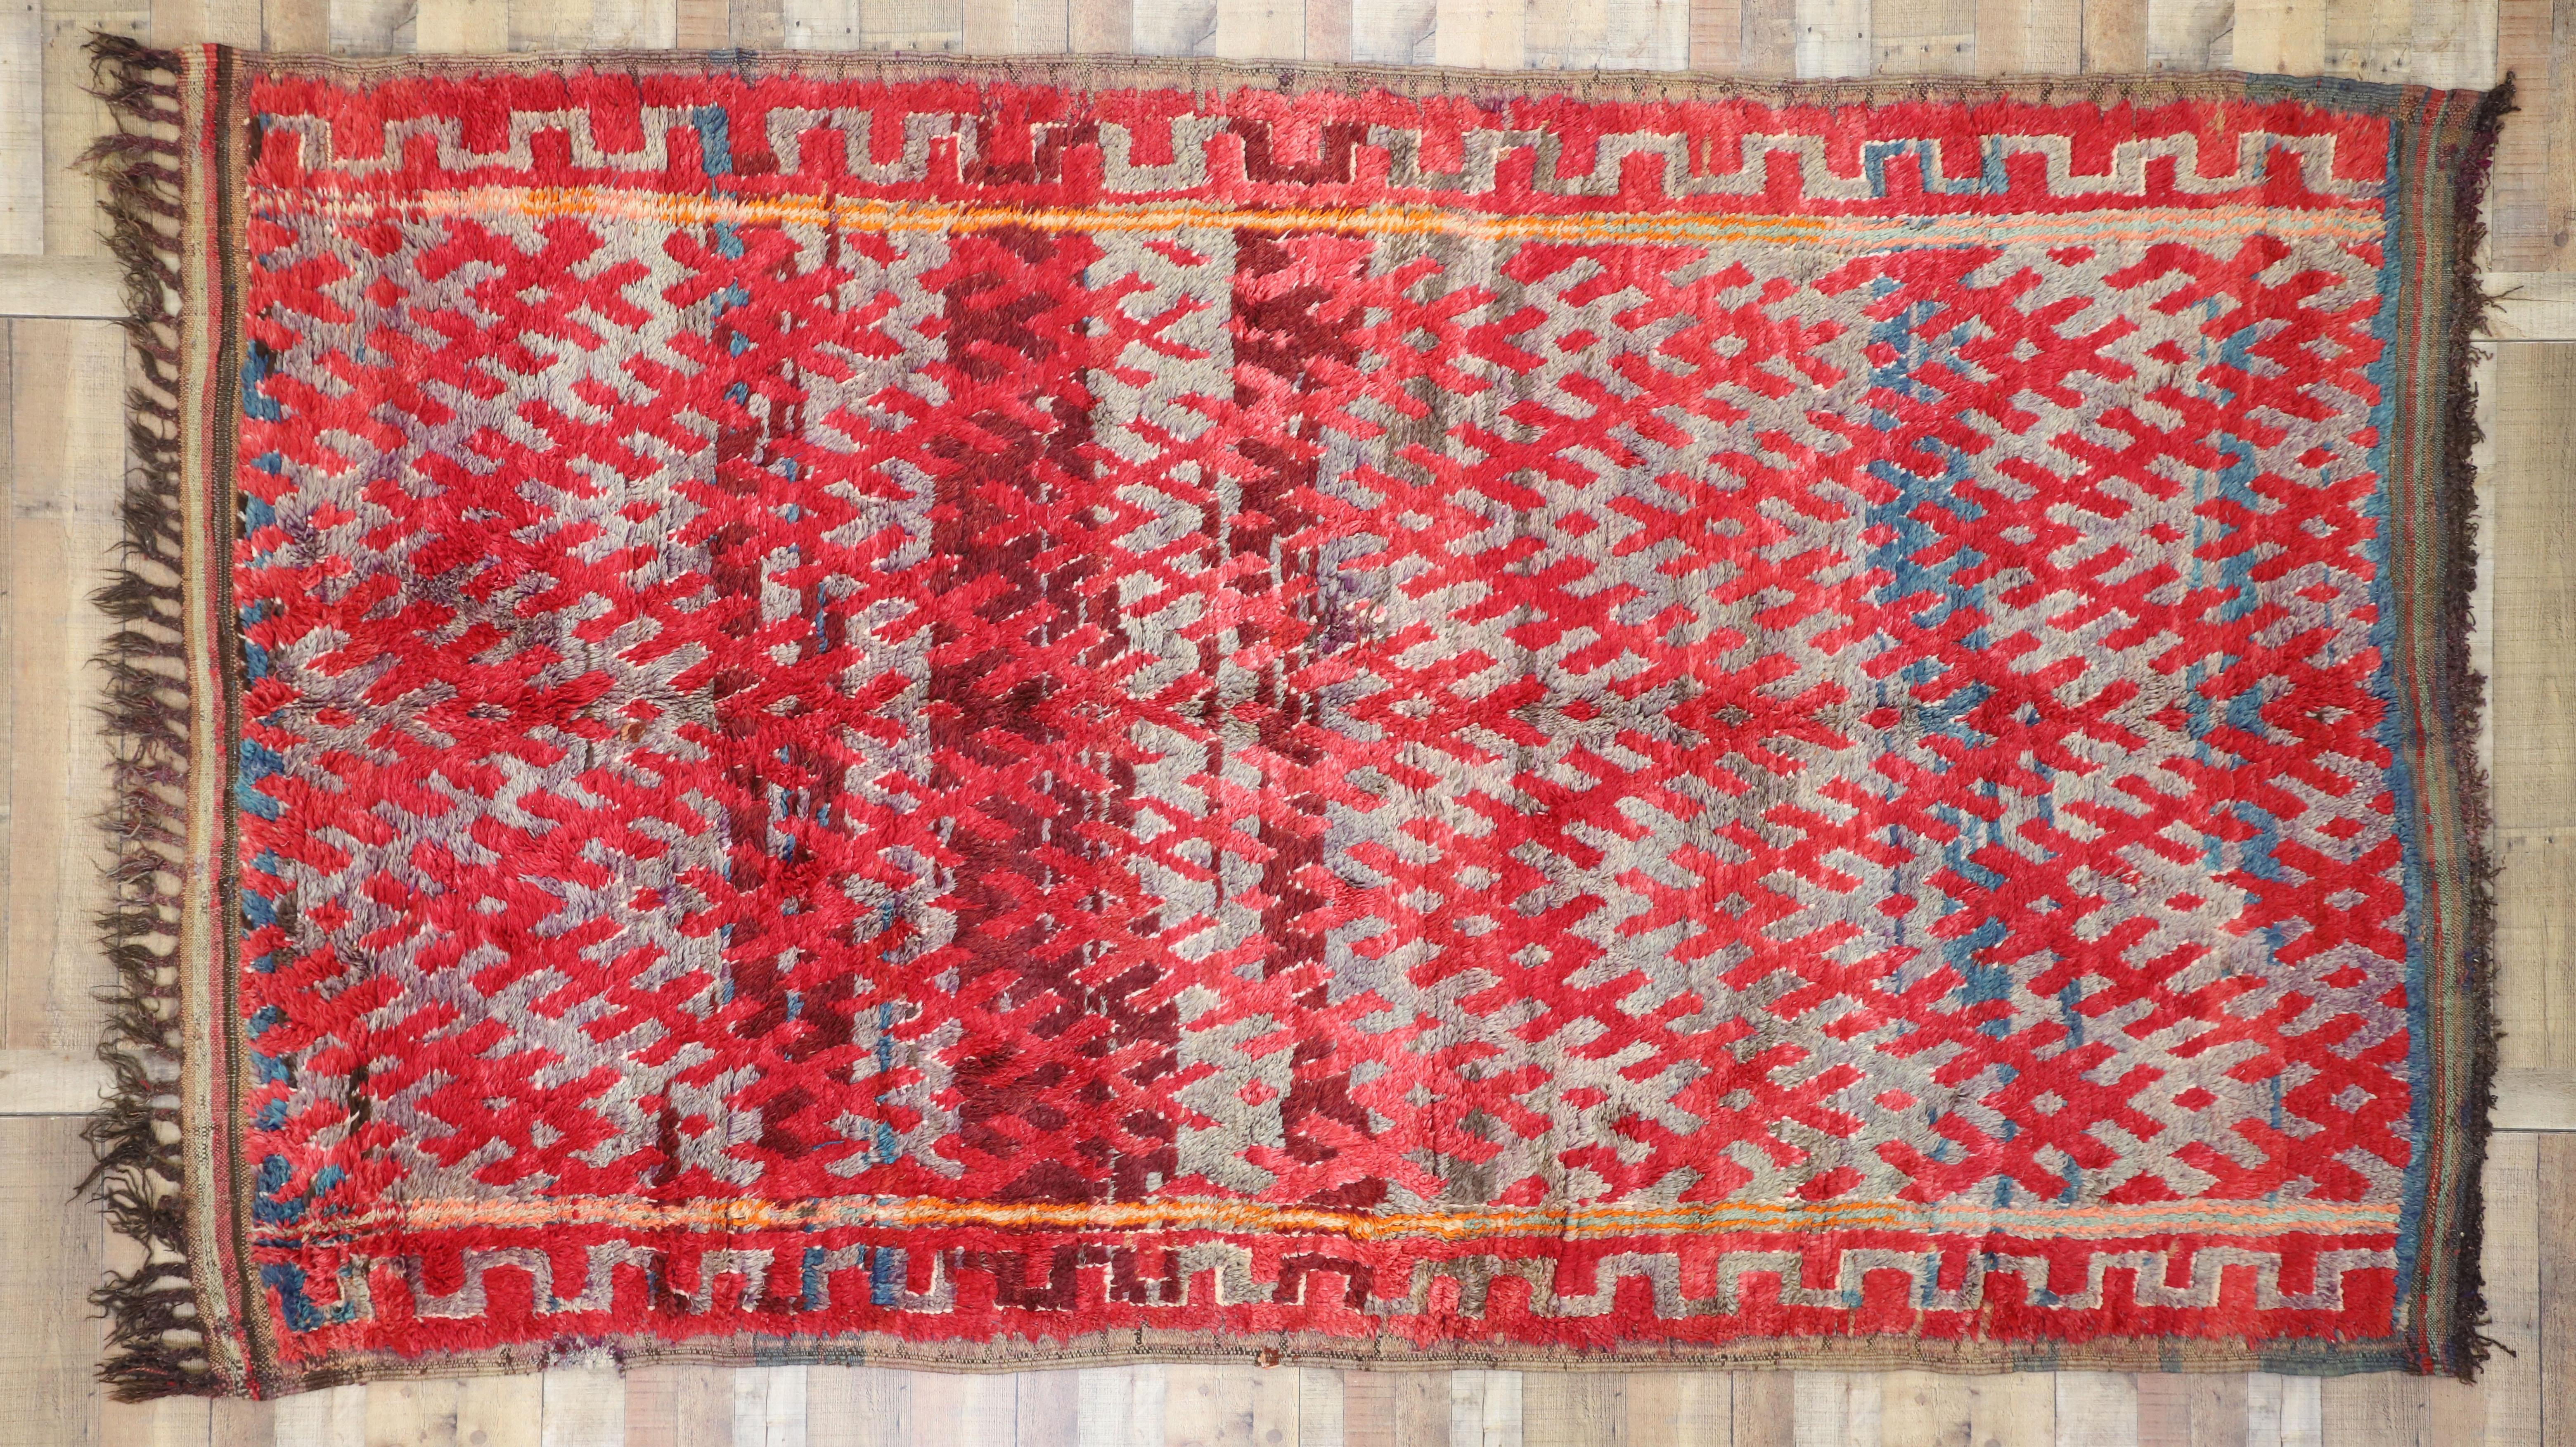 Wool Vintage Moroccan Rug, Berber Moroccan Rug with Vibrant Mid-Century Modern Style